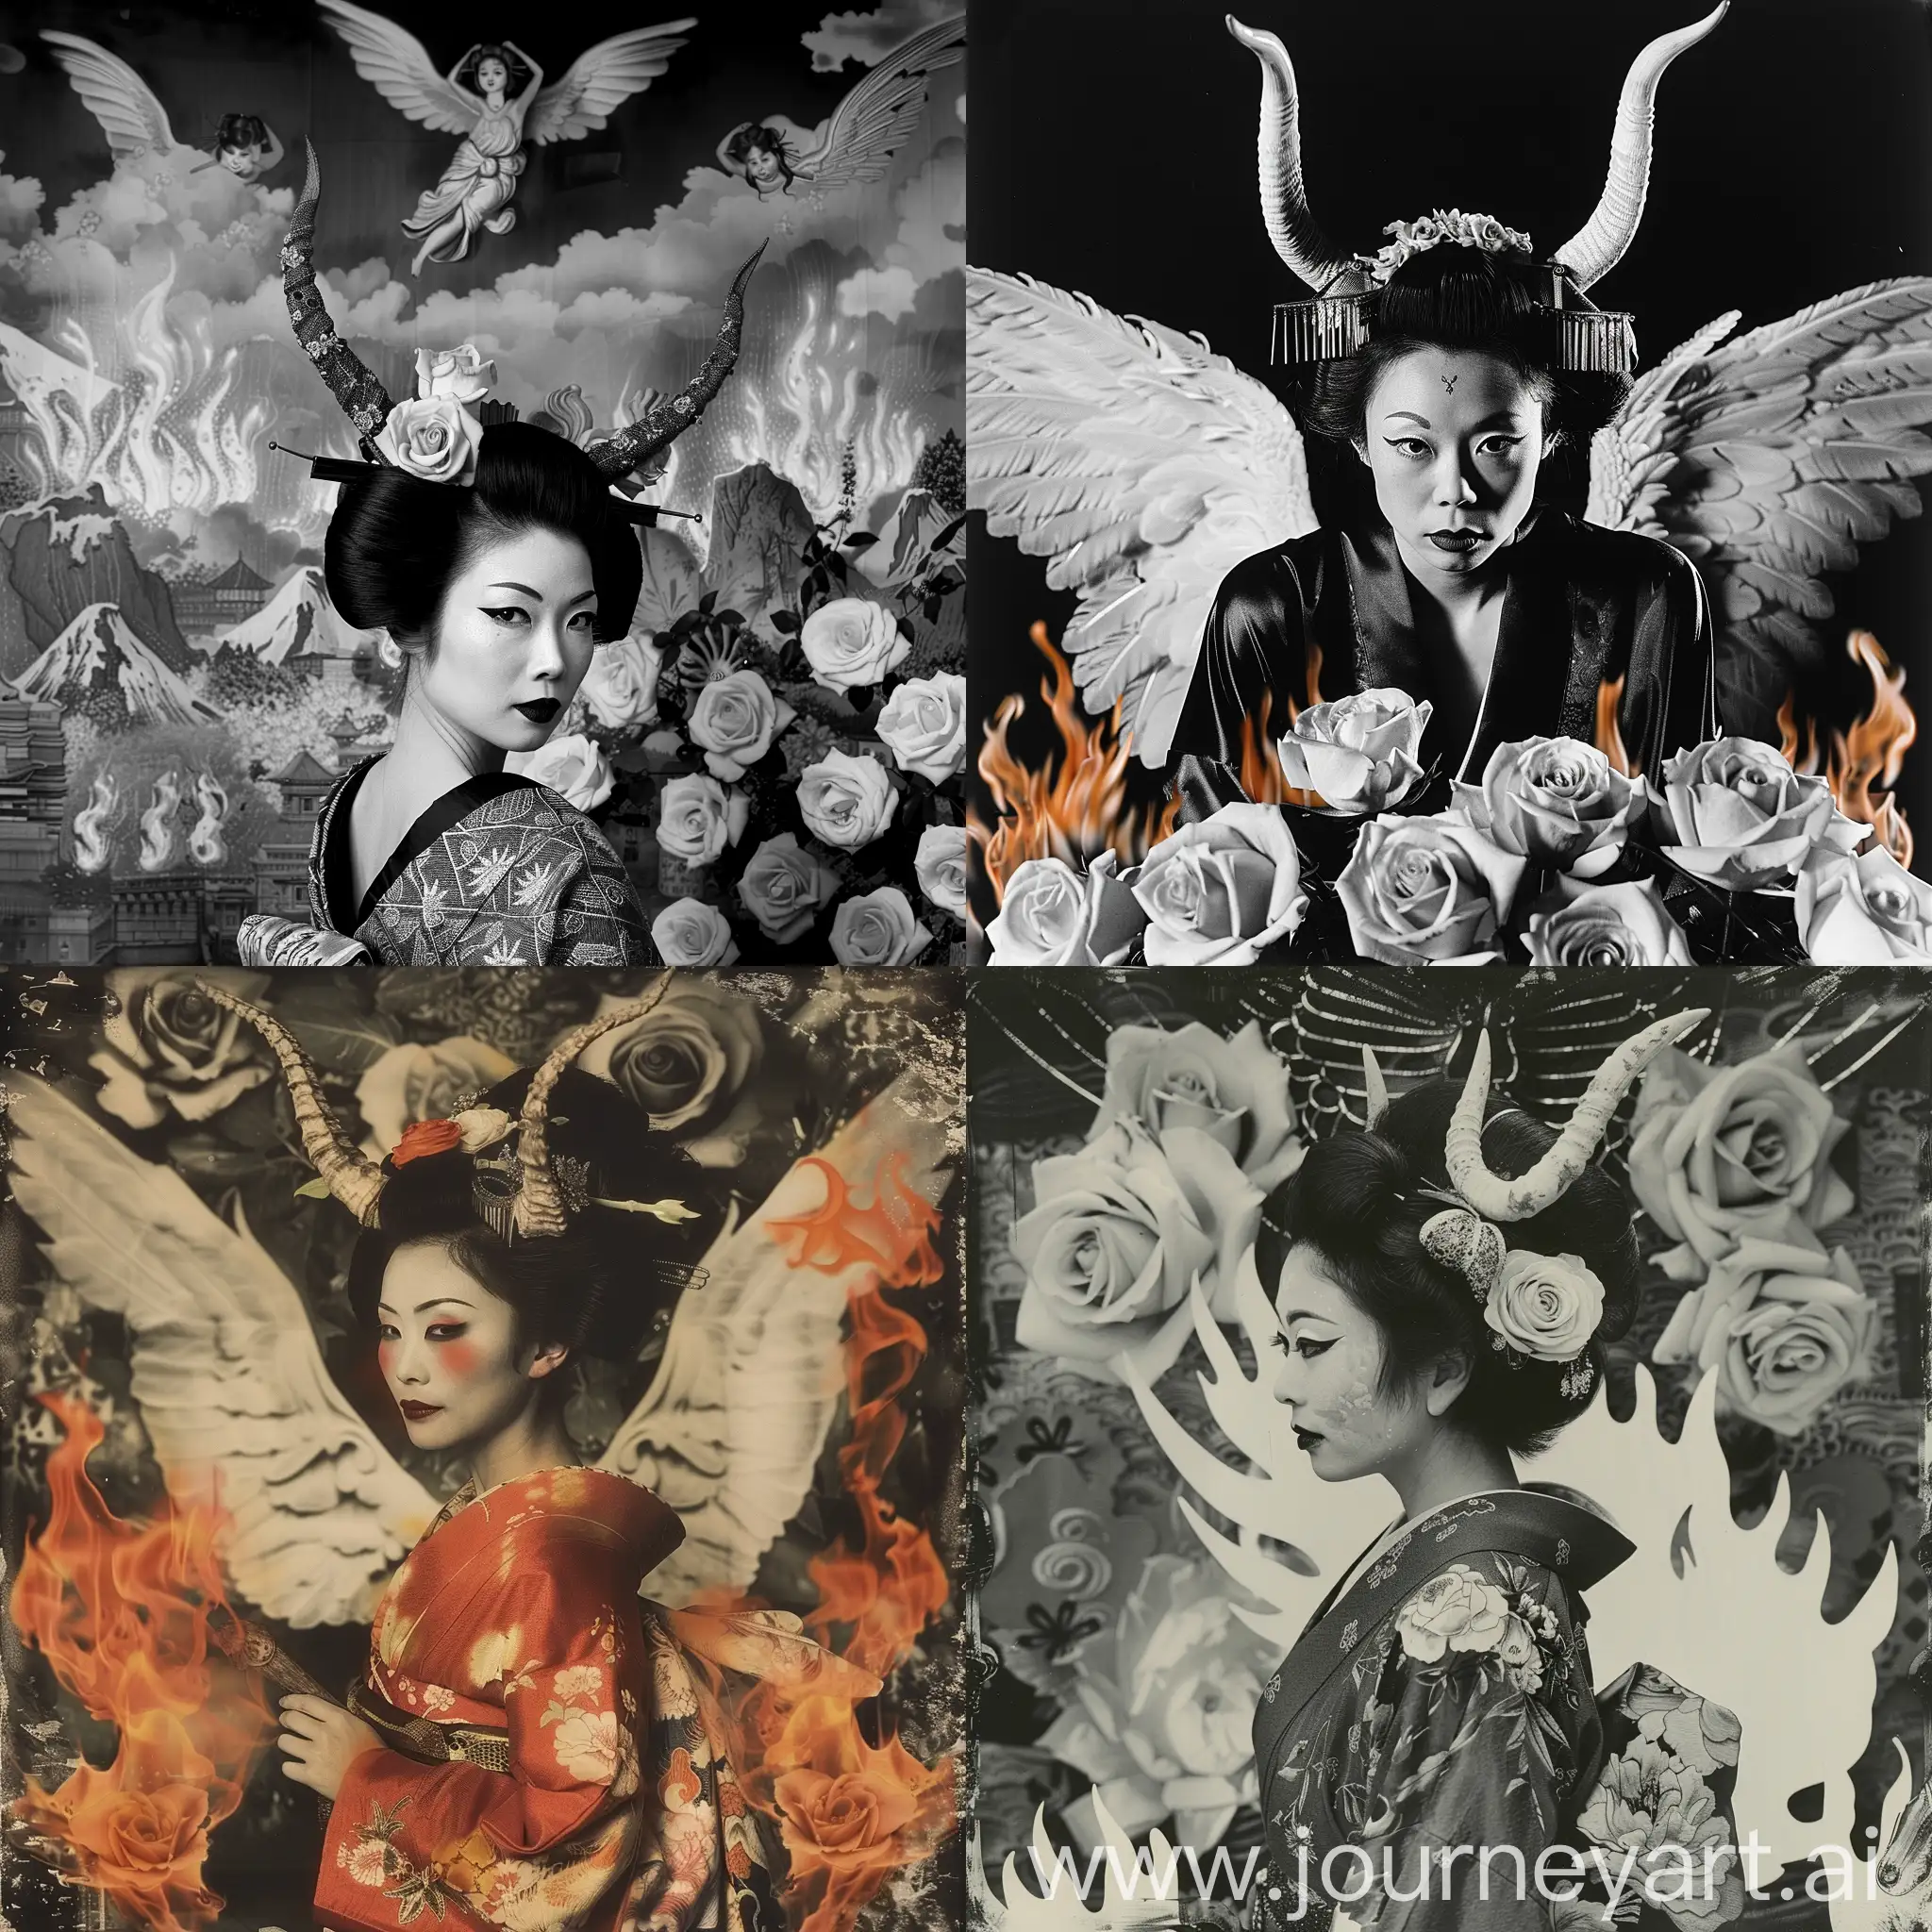 Mystical-Geisha-with-Horns-Amidst-Angelic-Flames-and-Roses-in-Peter-Lindbergh-Style